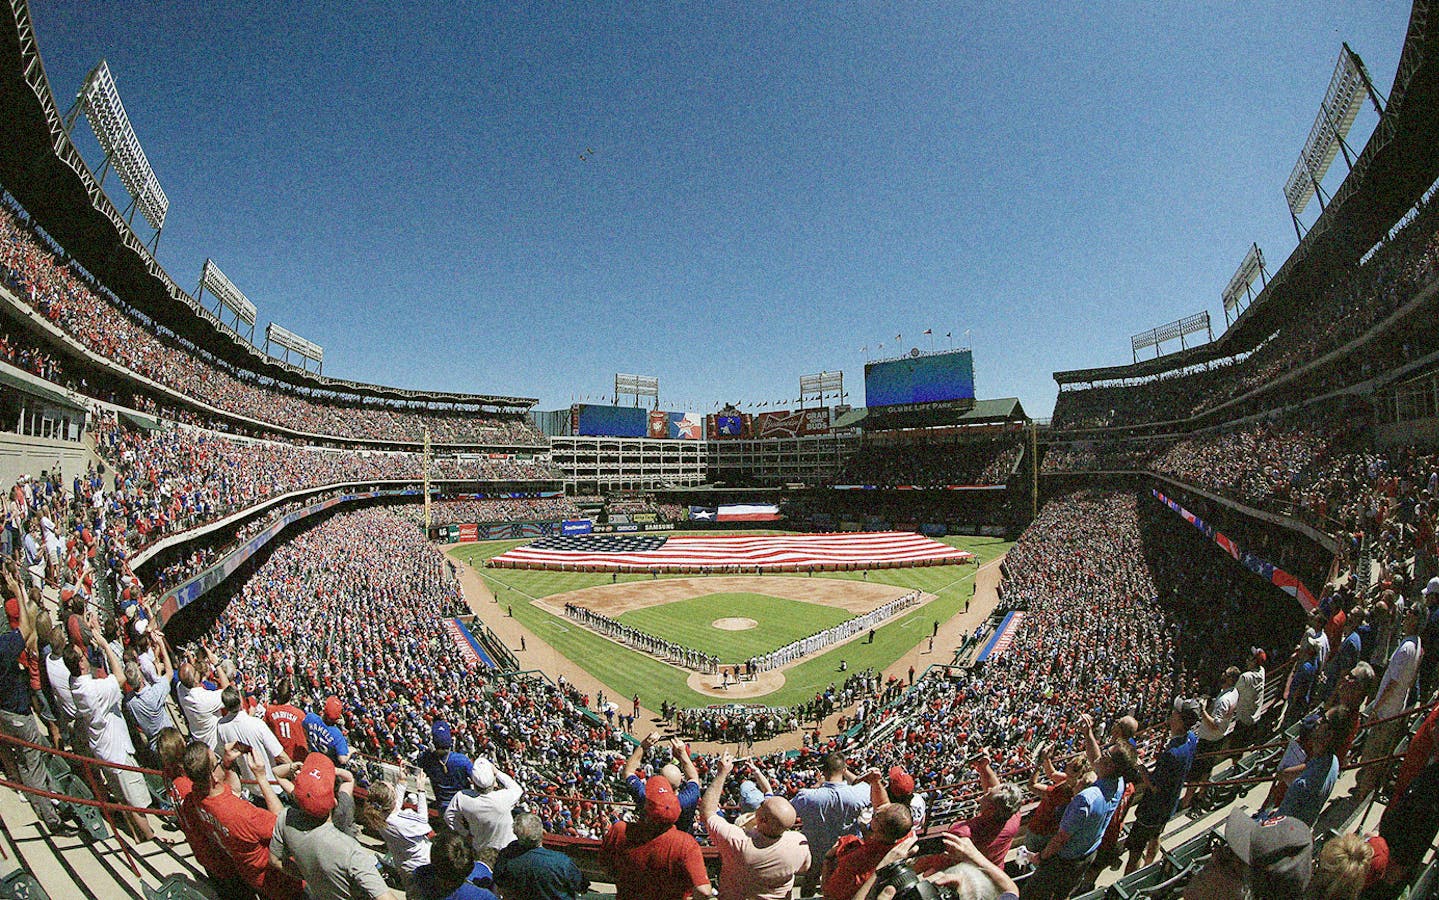 The new Texas Rangers stadium is completely air-conditioned with